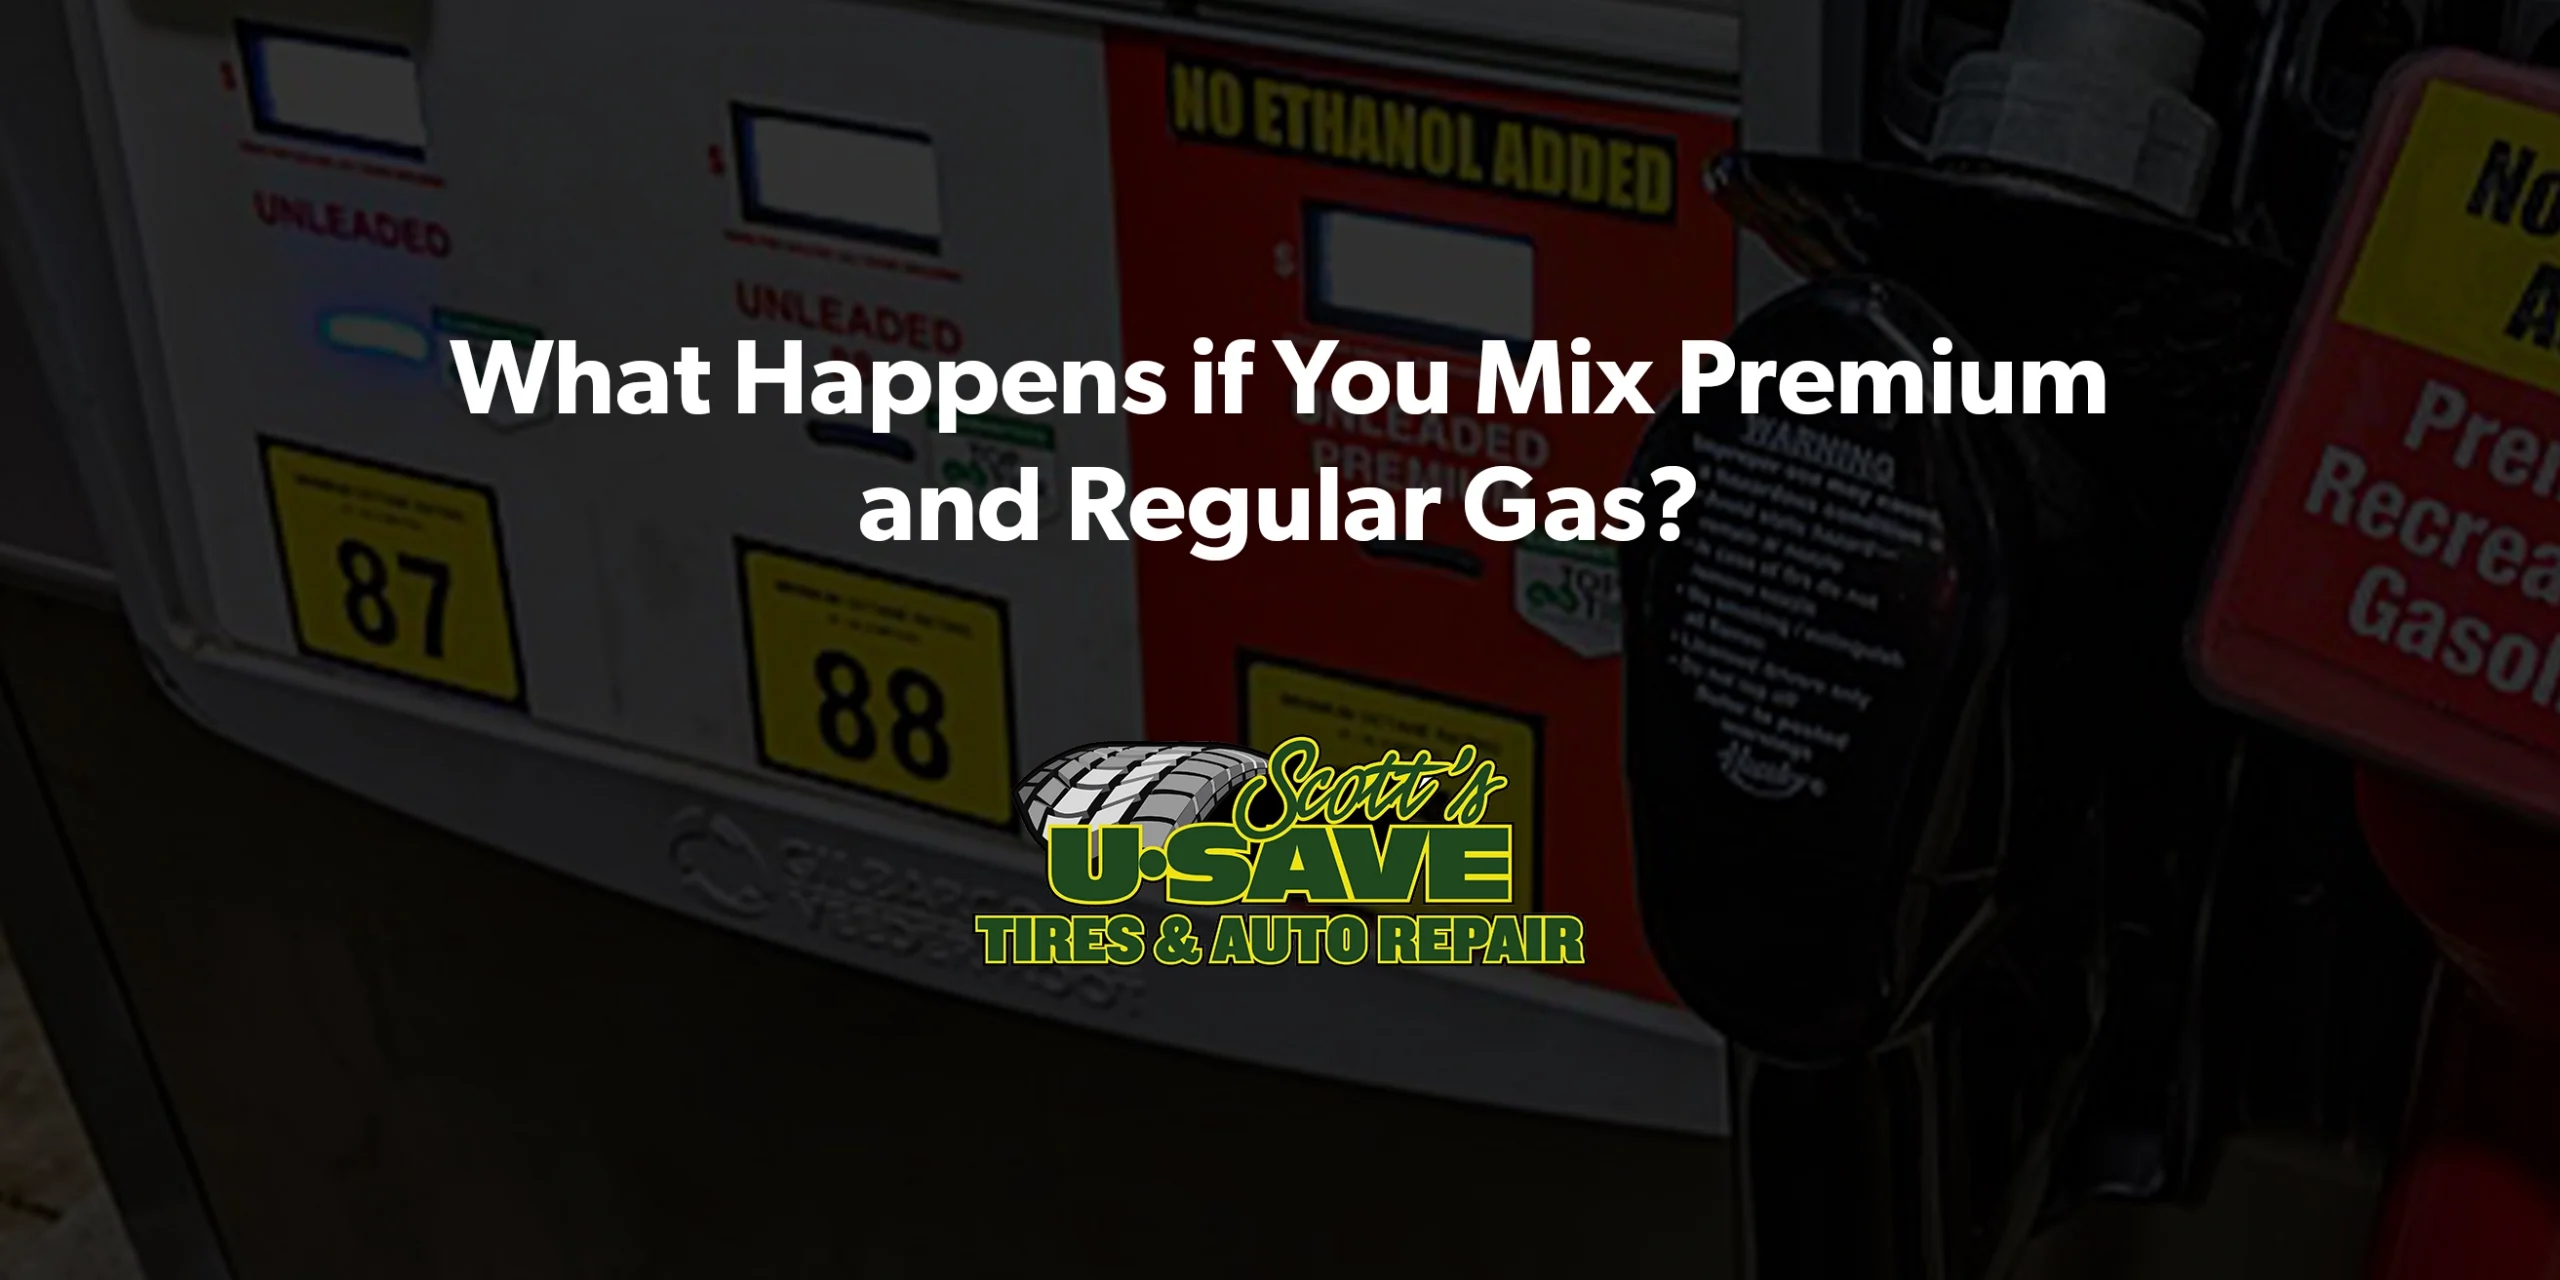 What Happens if You Mix Premium and Regular Gas?